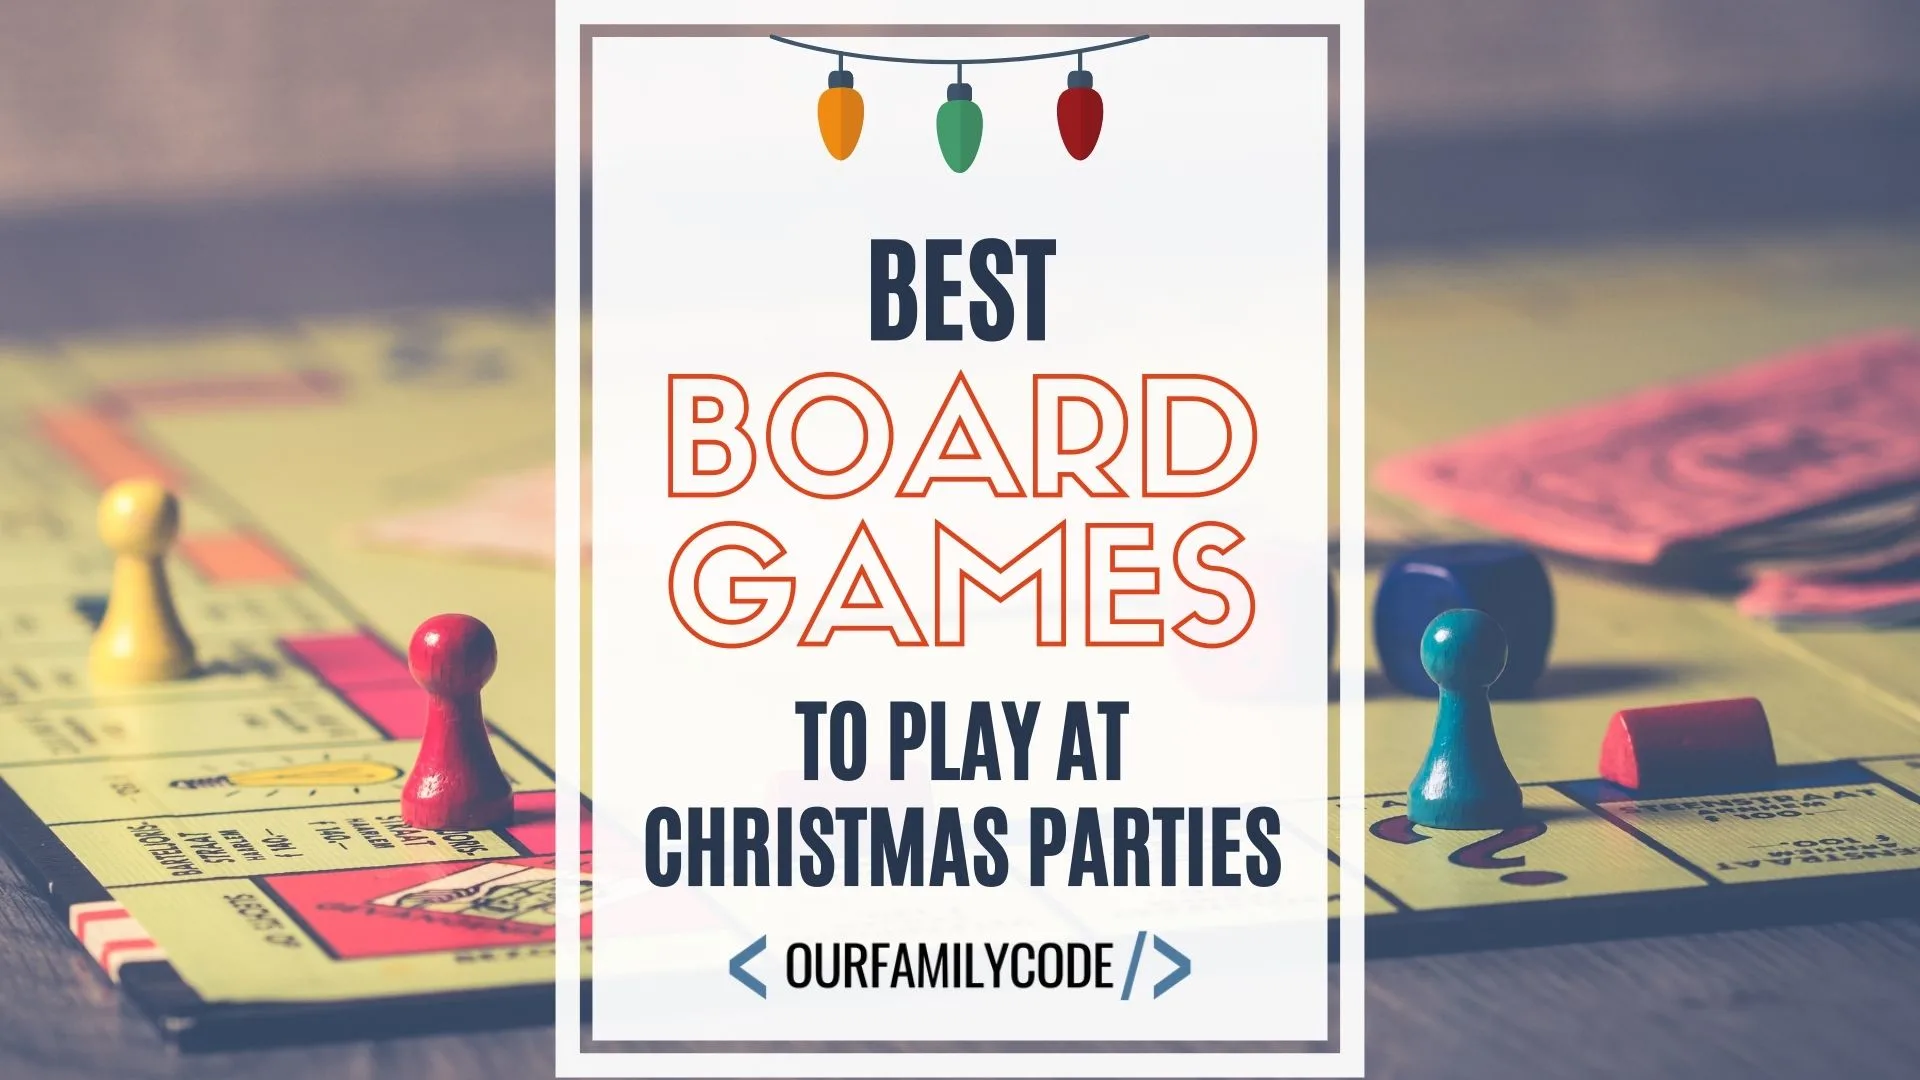 Board Game - an Award-Winning Family Game - Hilarious Family Games & Adults  - Family Games for Game Night Christmas Halloween Thanksgiving gifts